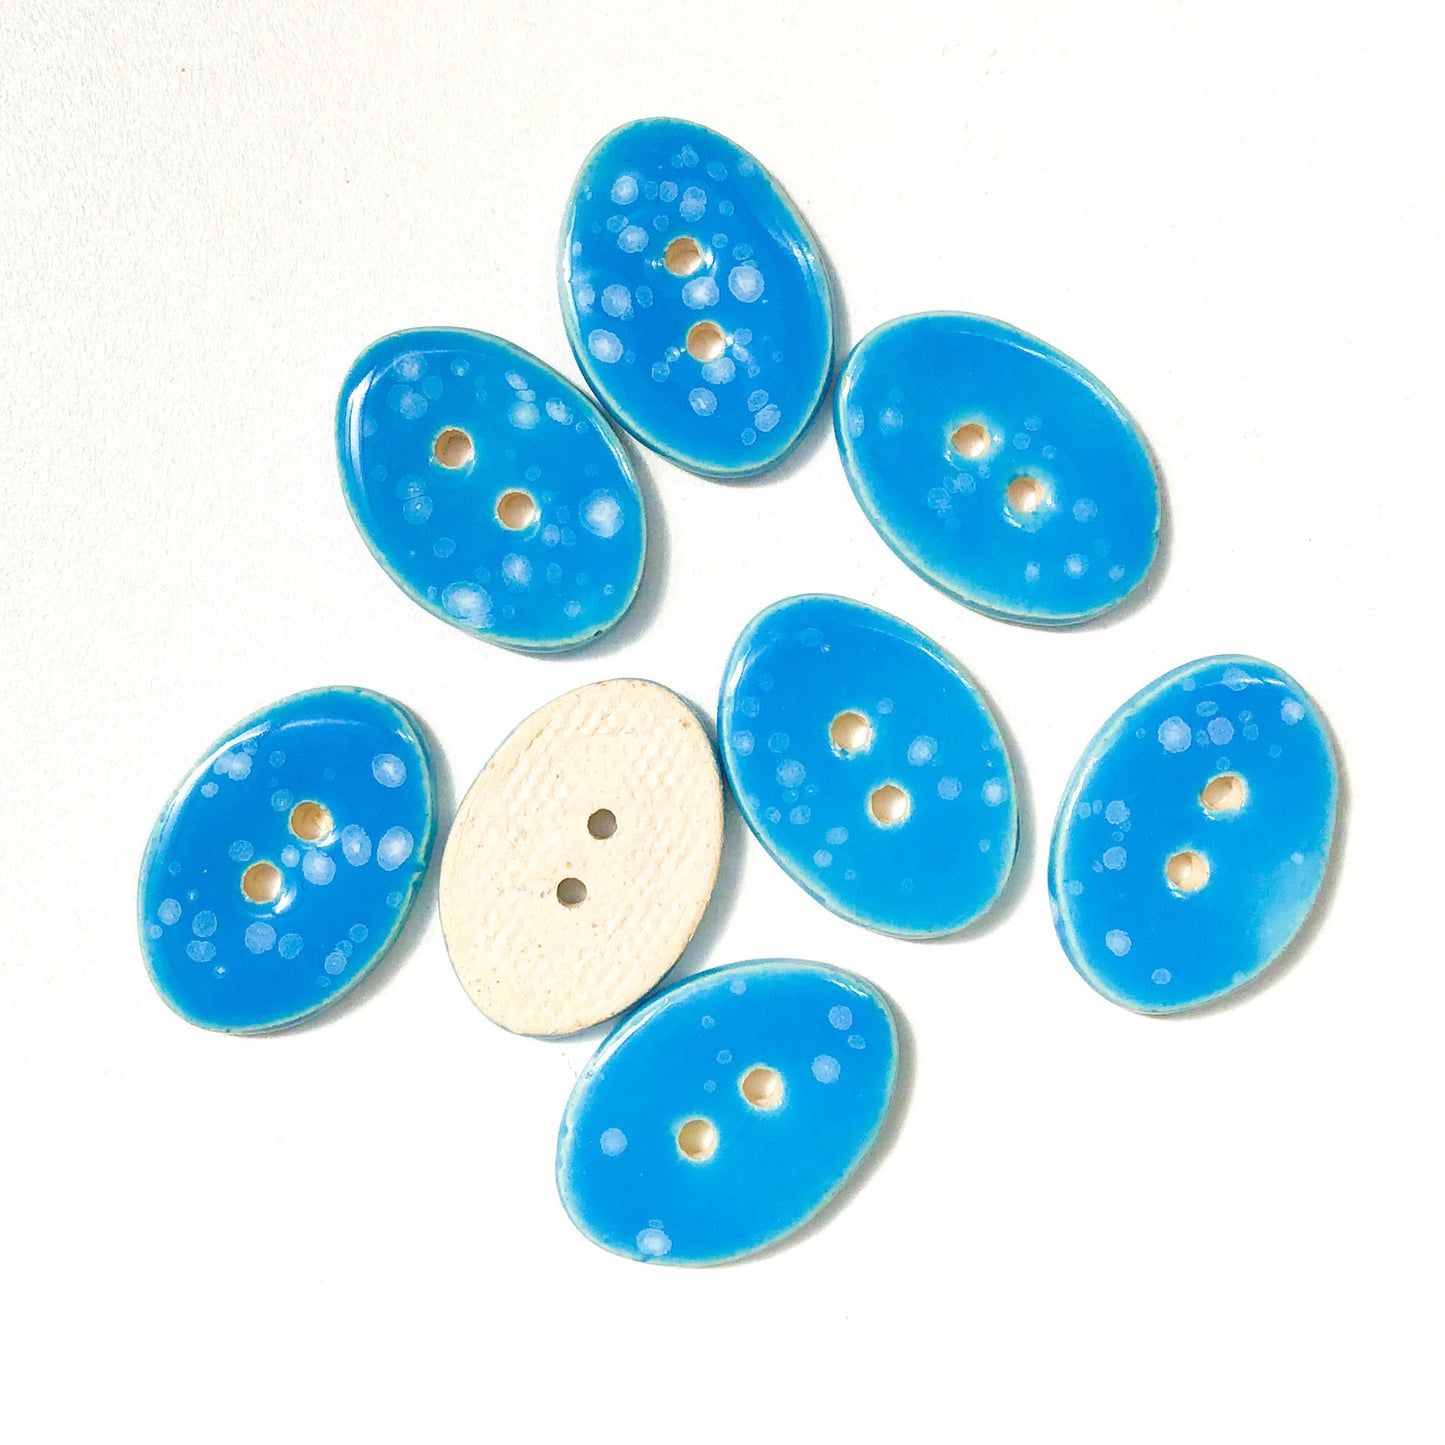 Speckled Bright Blue Oval Clay Buttons - 5/8" x 7/8" - 8 Pack (ws-210)